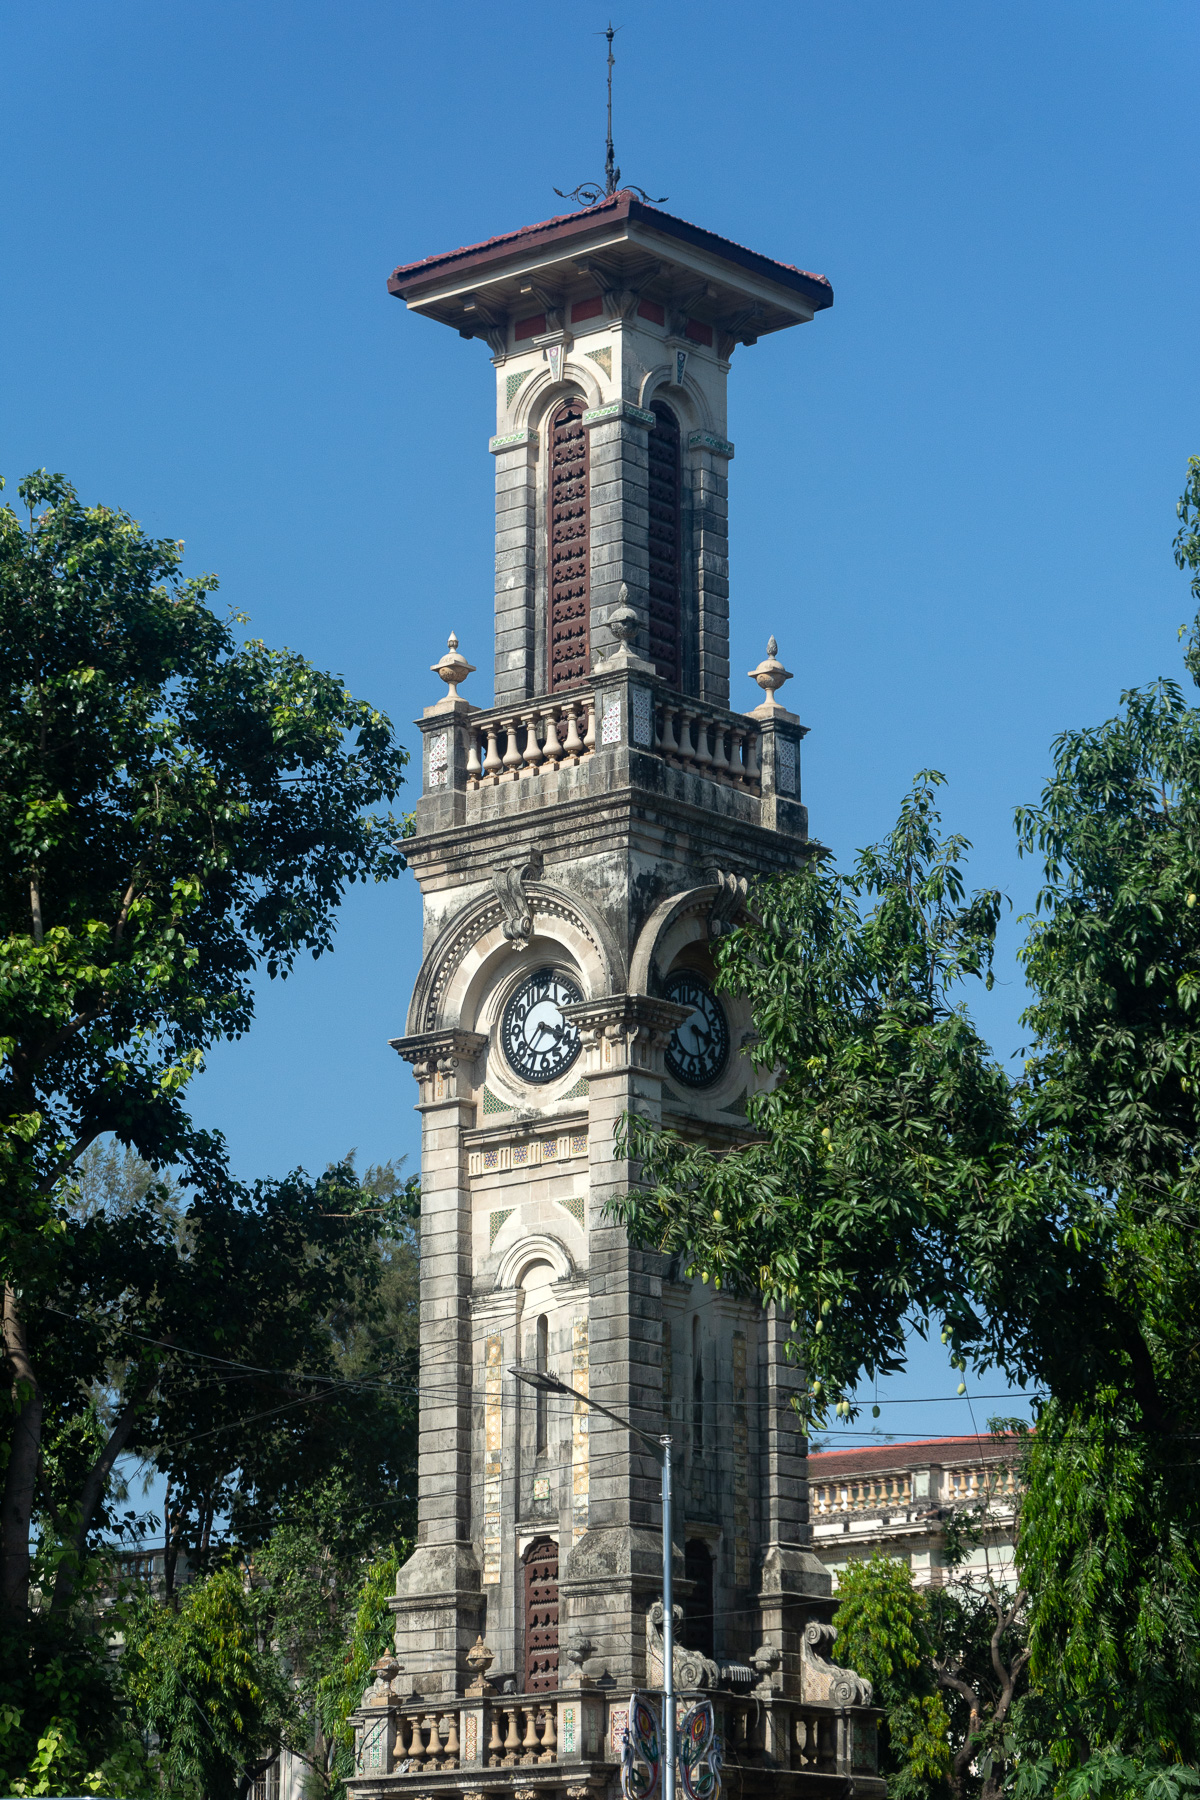 The David Sassoon clock tower originally stood outside the gates of Victoria Garden, by the side of the main road, then known as Parel Road (now BR Ambedkar Road). 